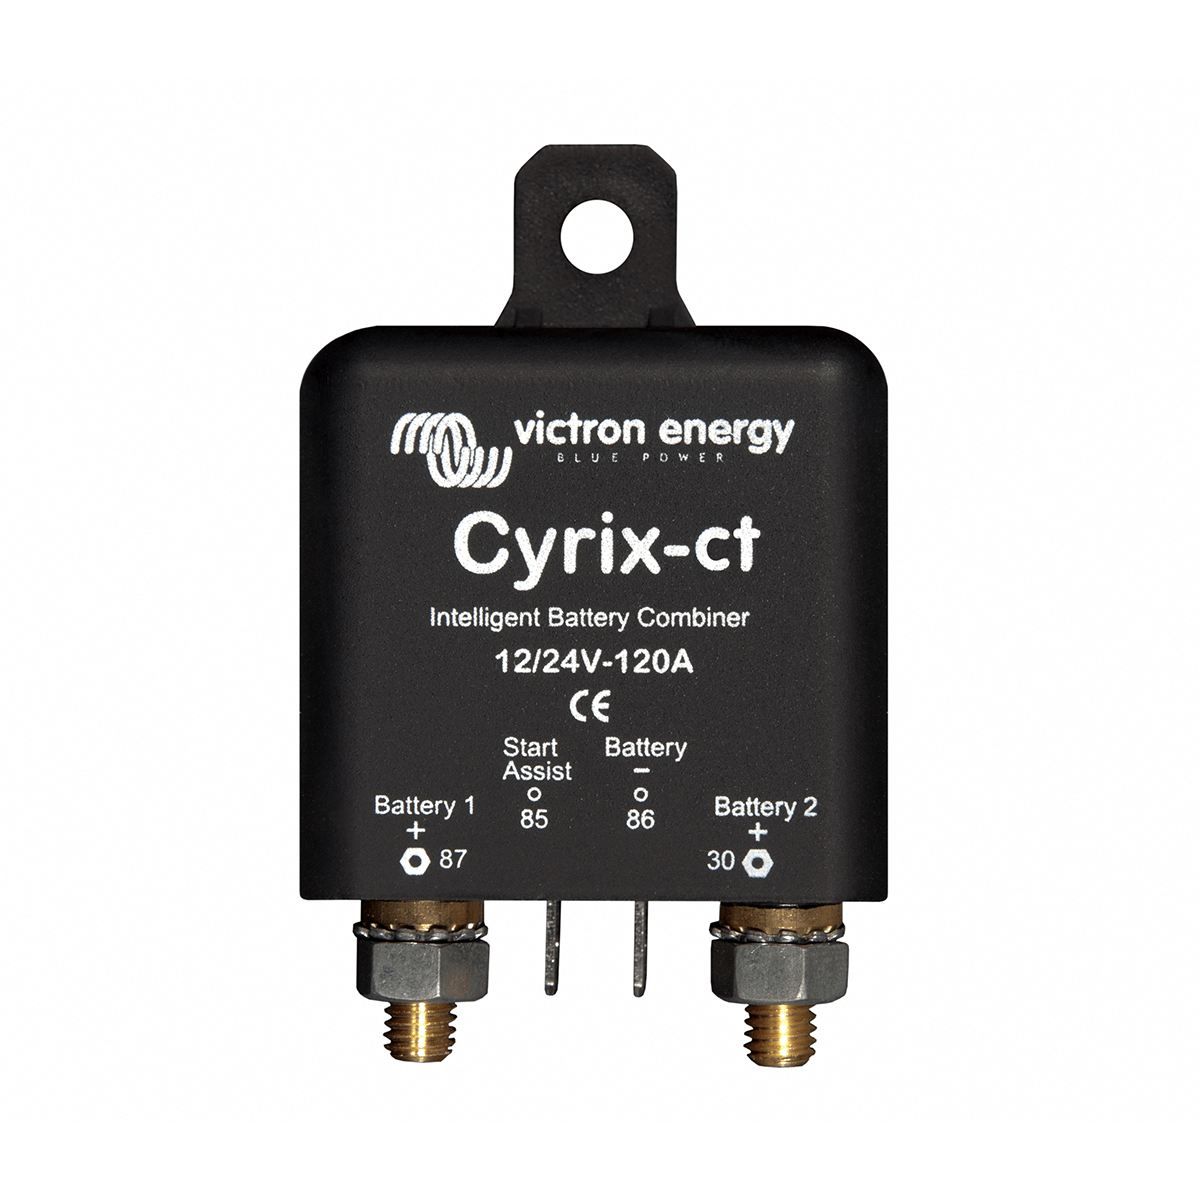 Cyrix-ct 120A Battery Combiner - Voltage Sensitive Relay split charge relay